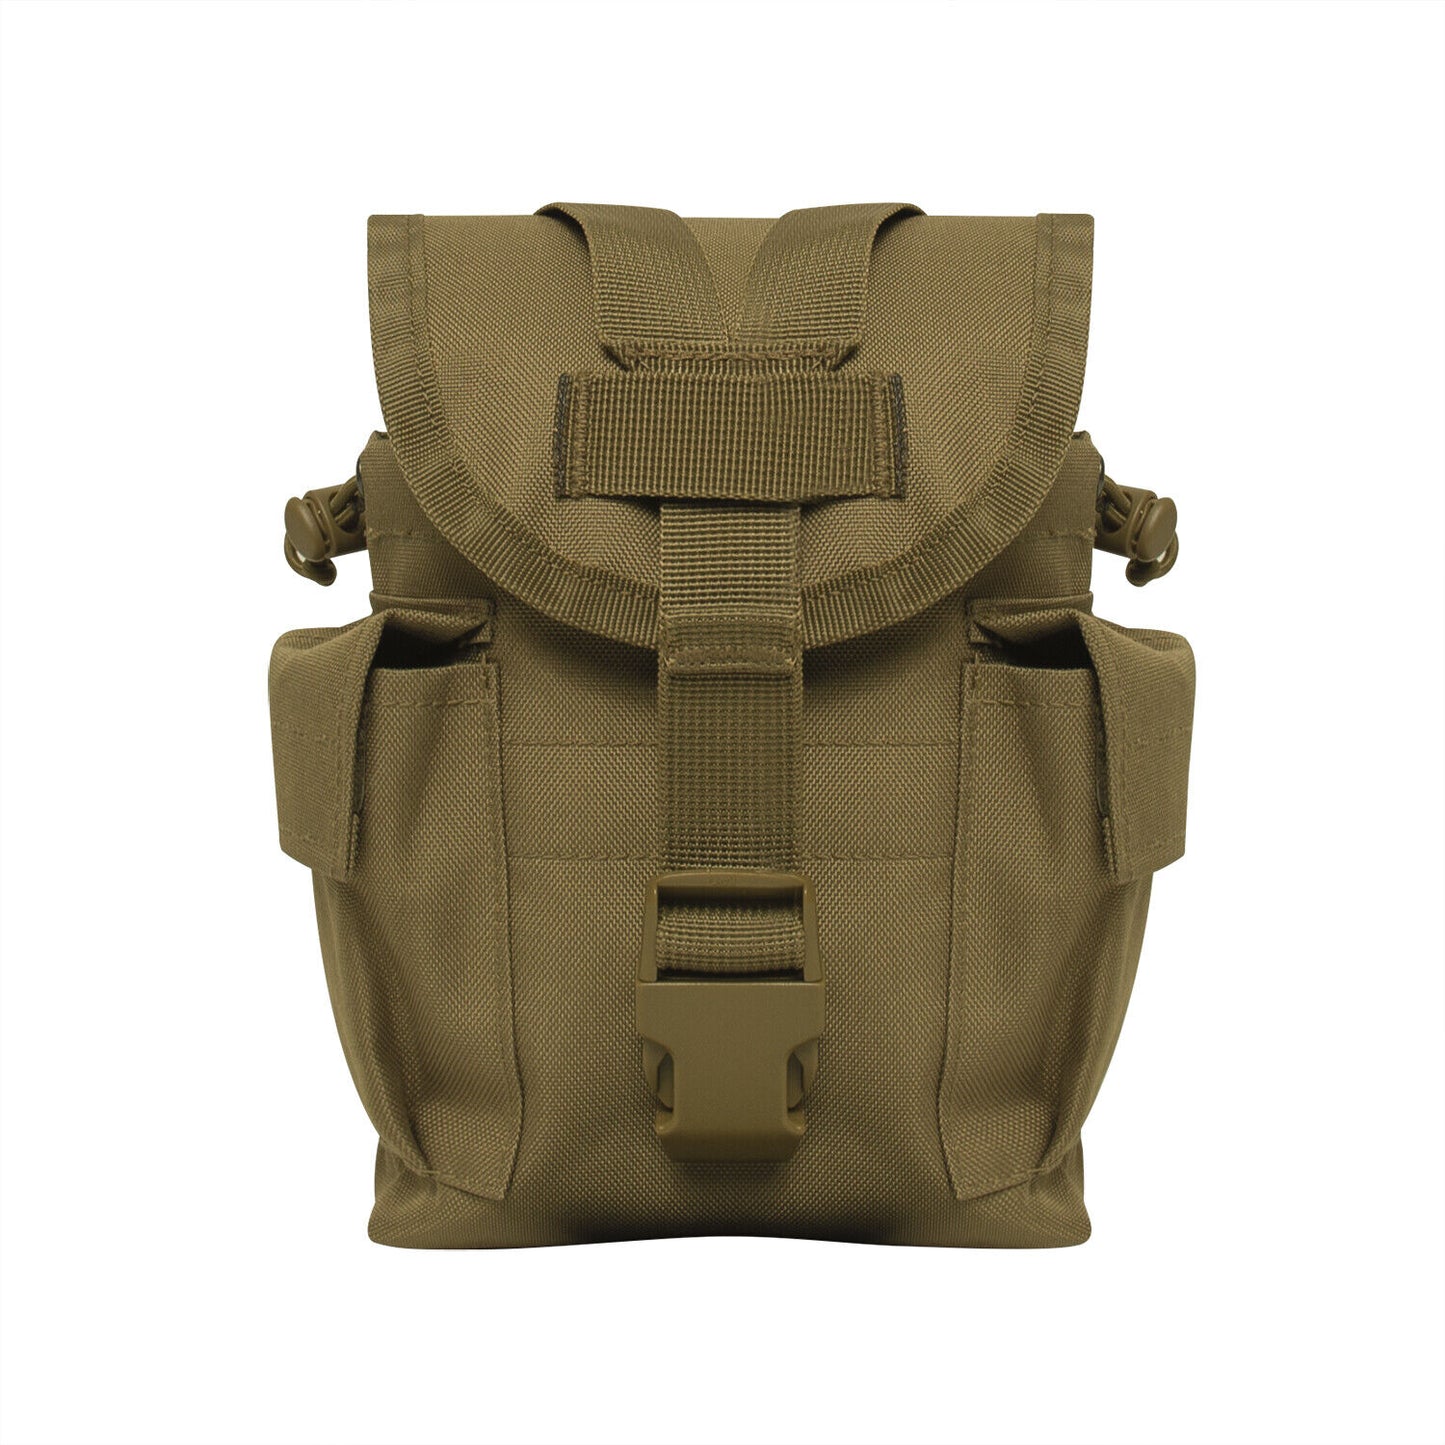 Rothco Utility Pouch with Survival Kit Essentials